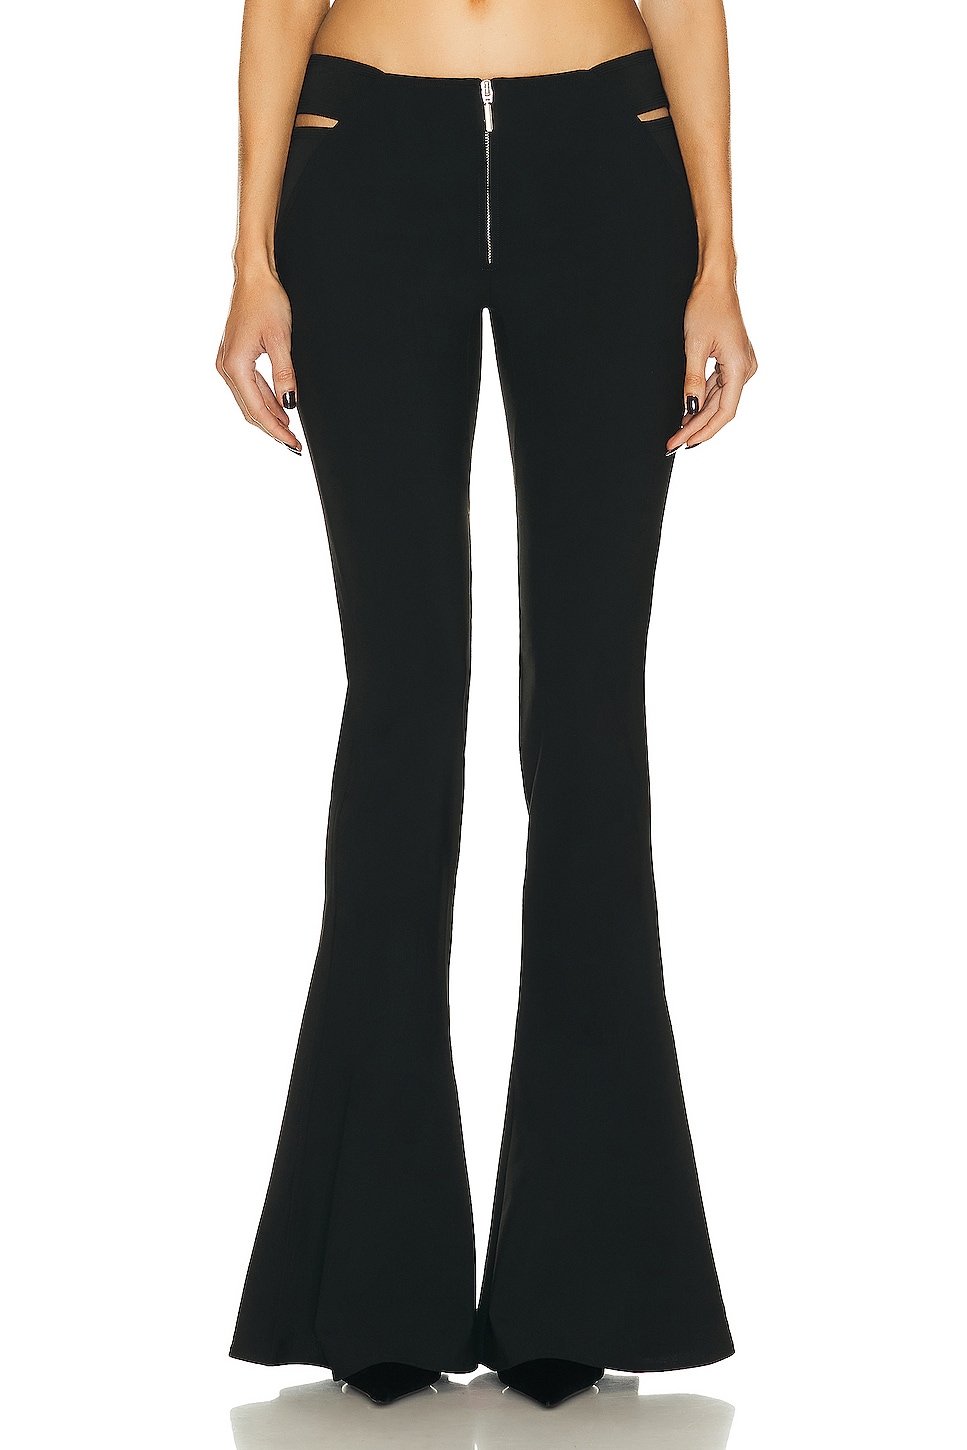 Jean Paul Gaultier X KNWLS Embroidered Flare Trouser in Black | FWRD